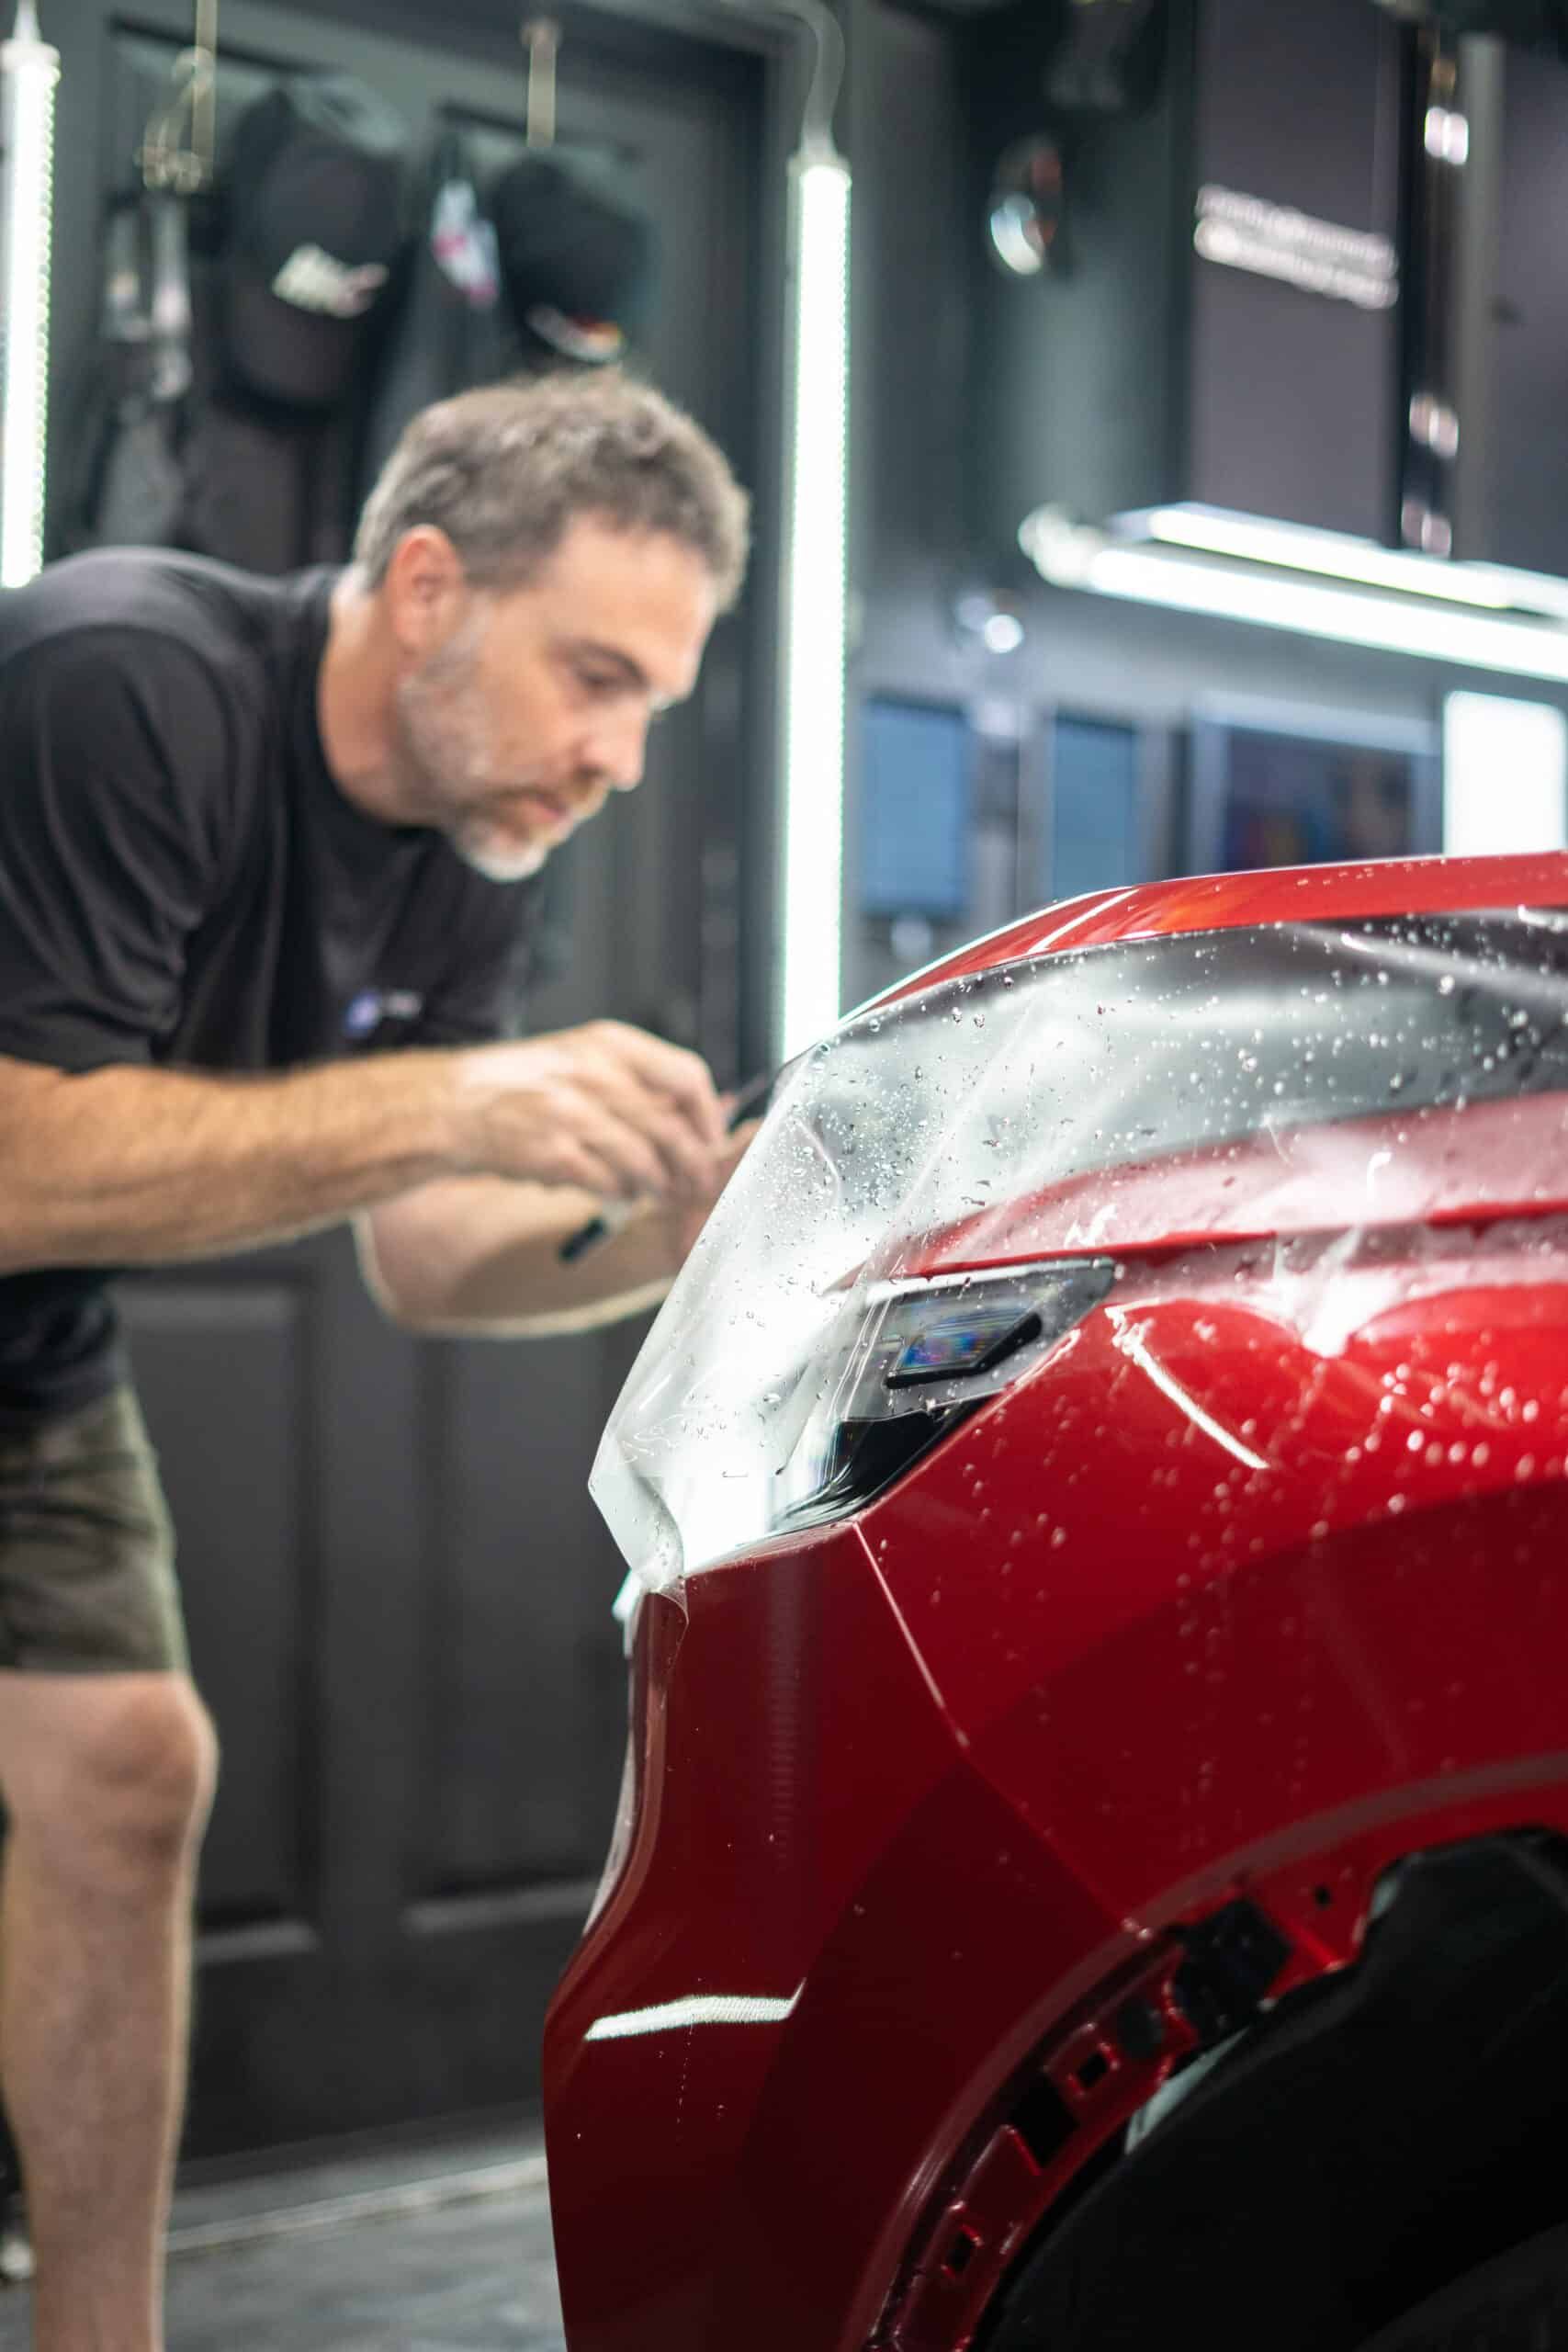 A man is applying a protective film to the front of a red car.